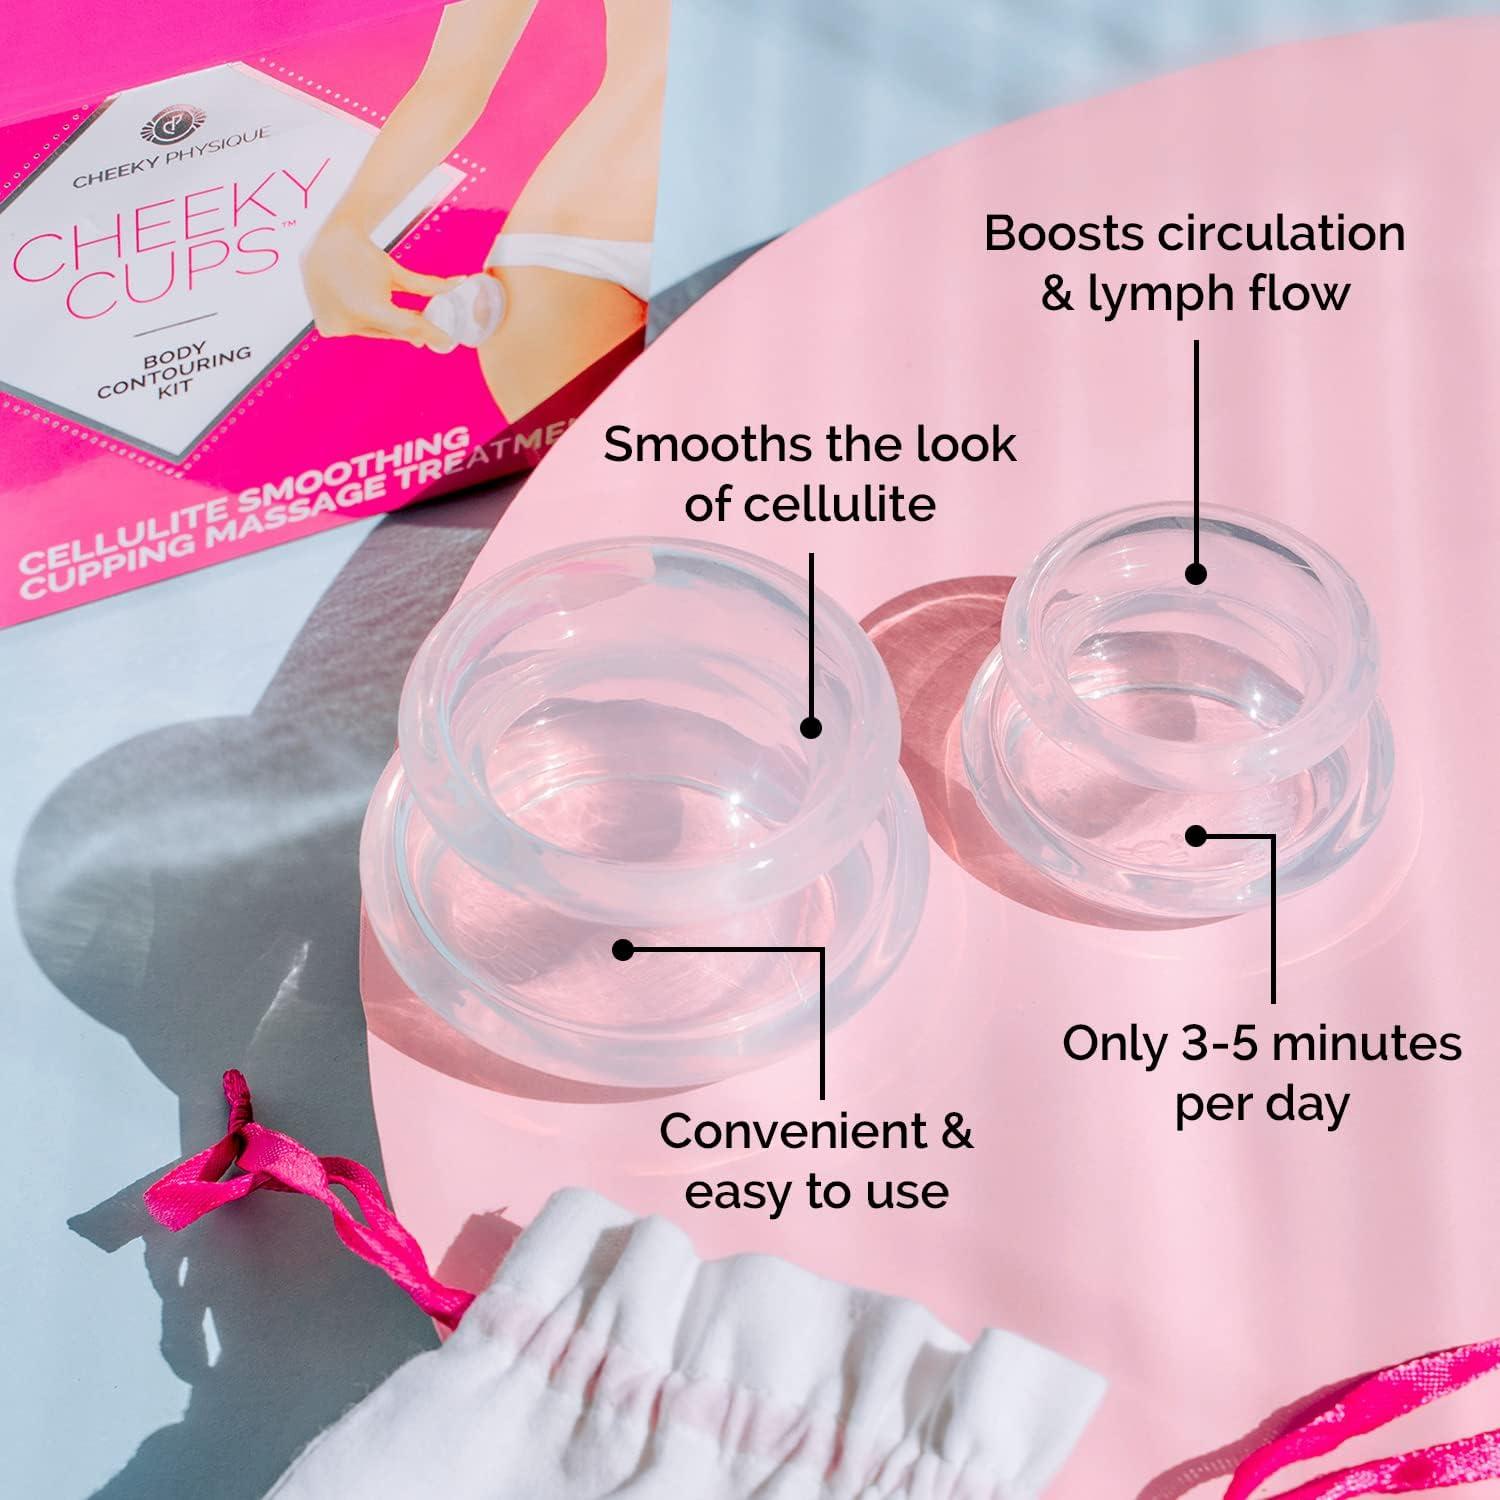 Cheeky Cups Cellulite Suction Cup Set - Anti Cellulite Cupping